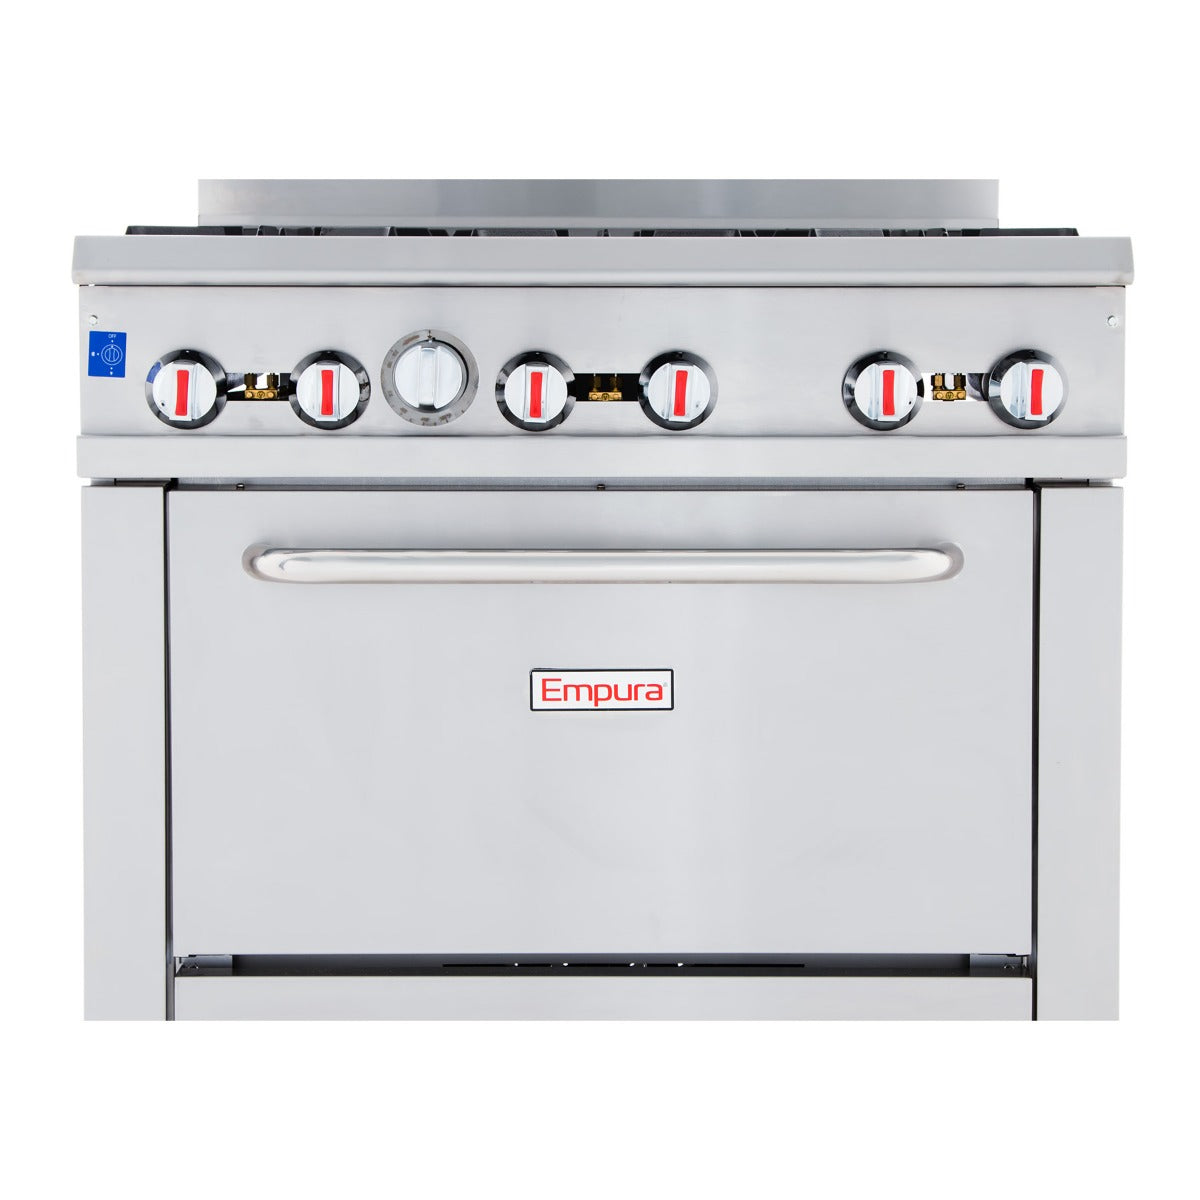 Empura EGR-36_NAT 36" Stainless Steel Commercial Gas Range with Oven, 6 Burners - Natural Gas, 210,000 BTU